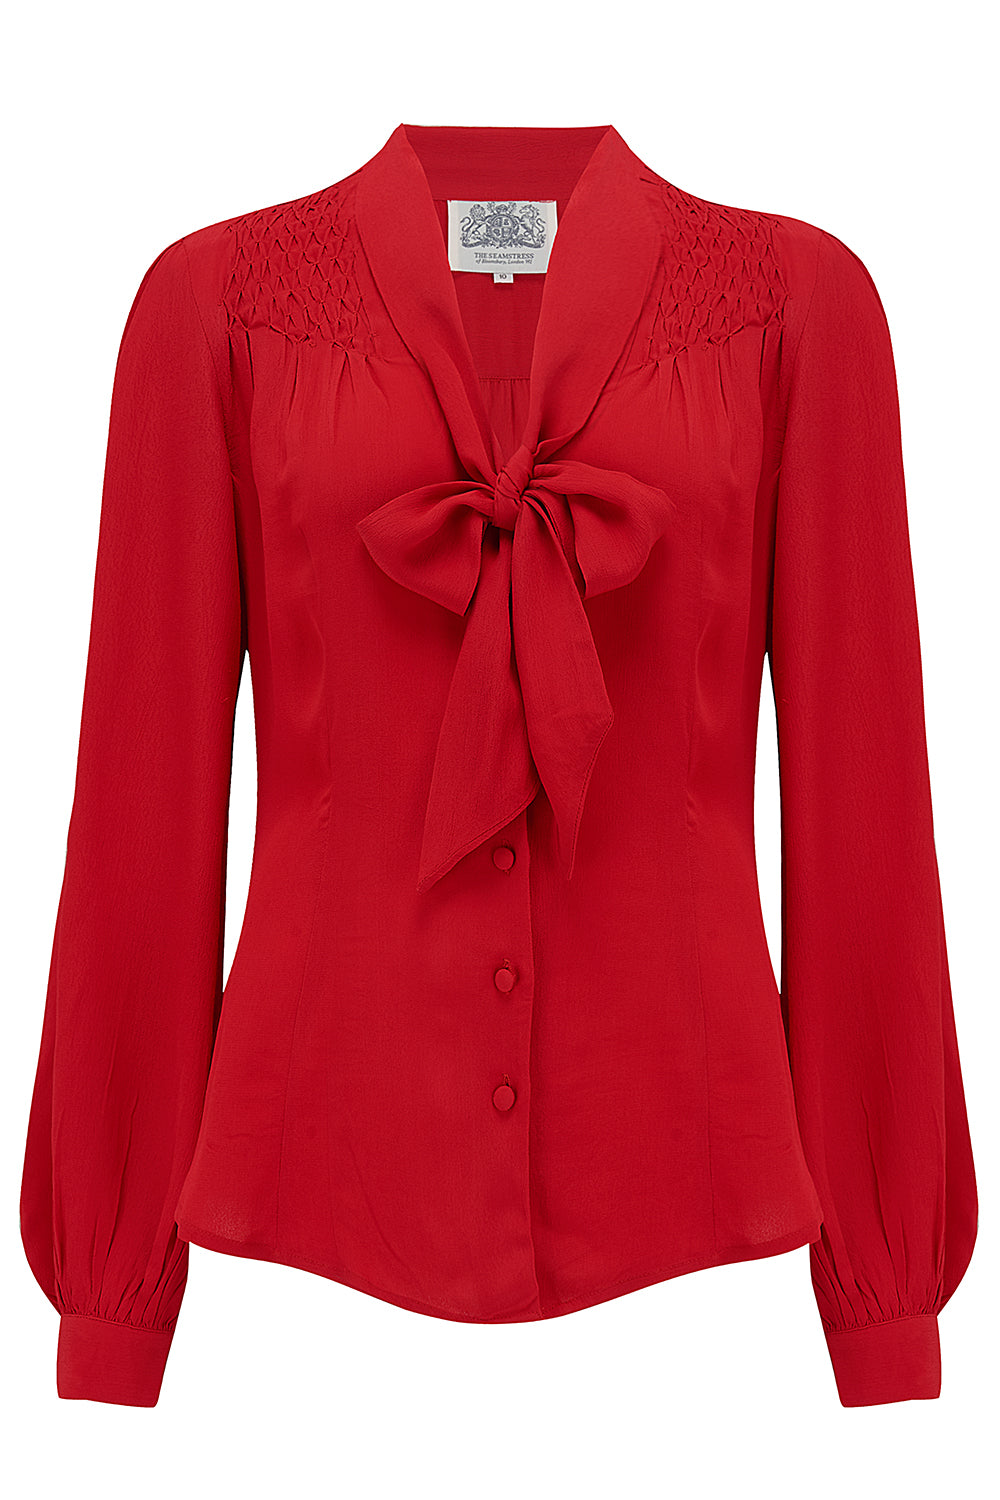 "Eva" Long Sleeve Blouse in 40s Red Authentic & Classic 1940s True Vintage Style product